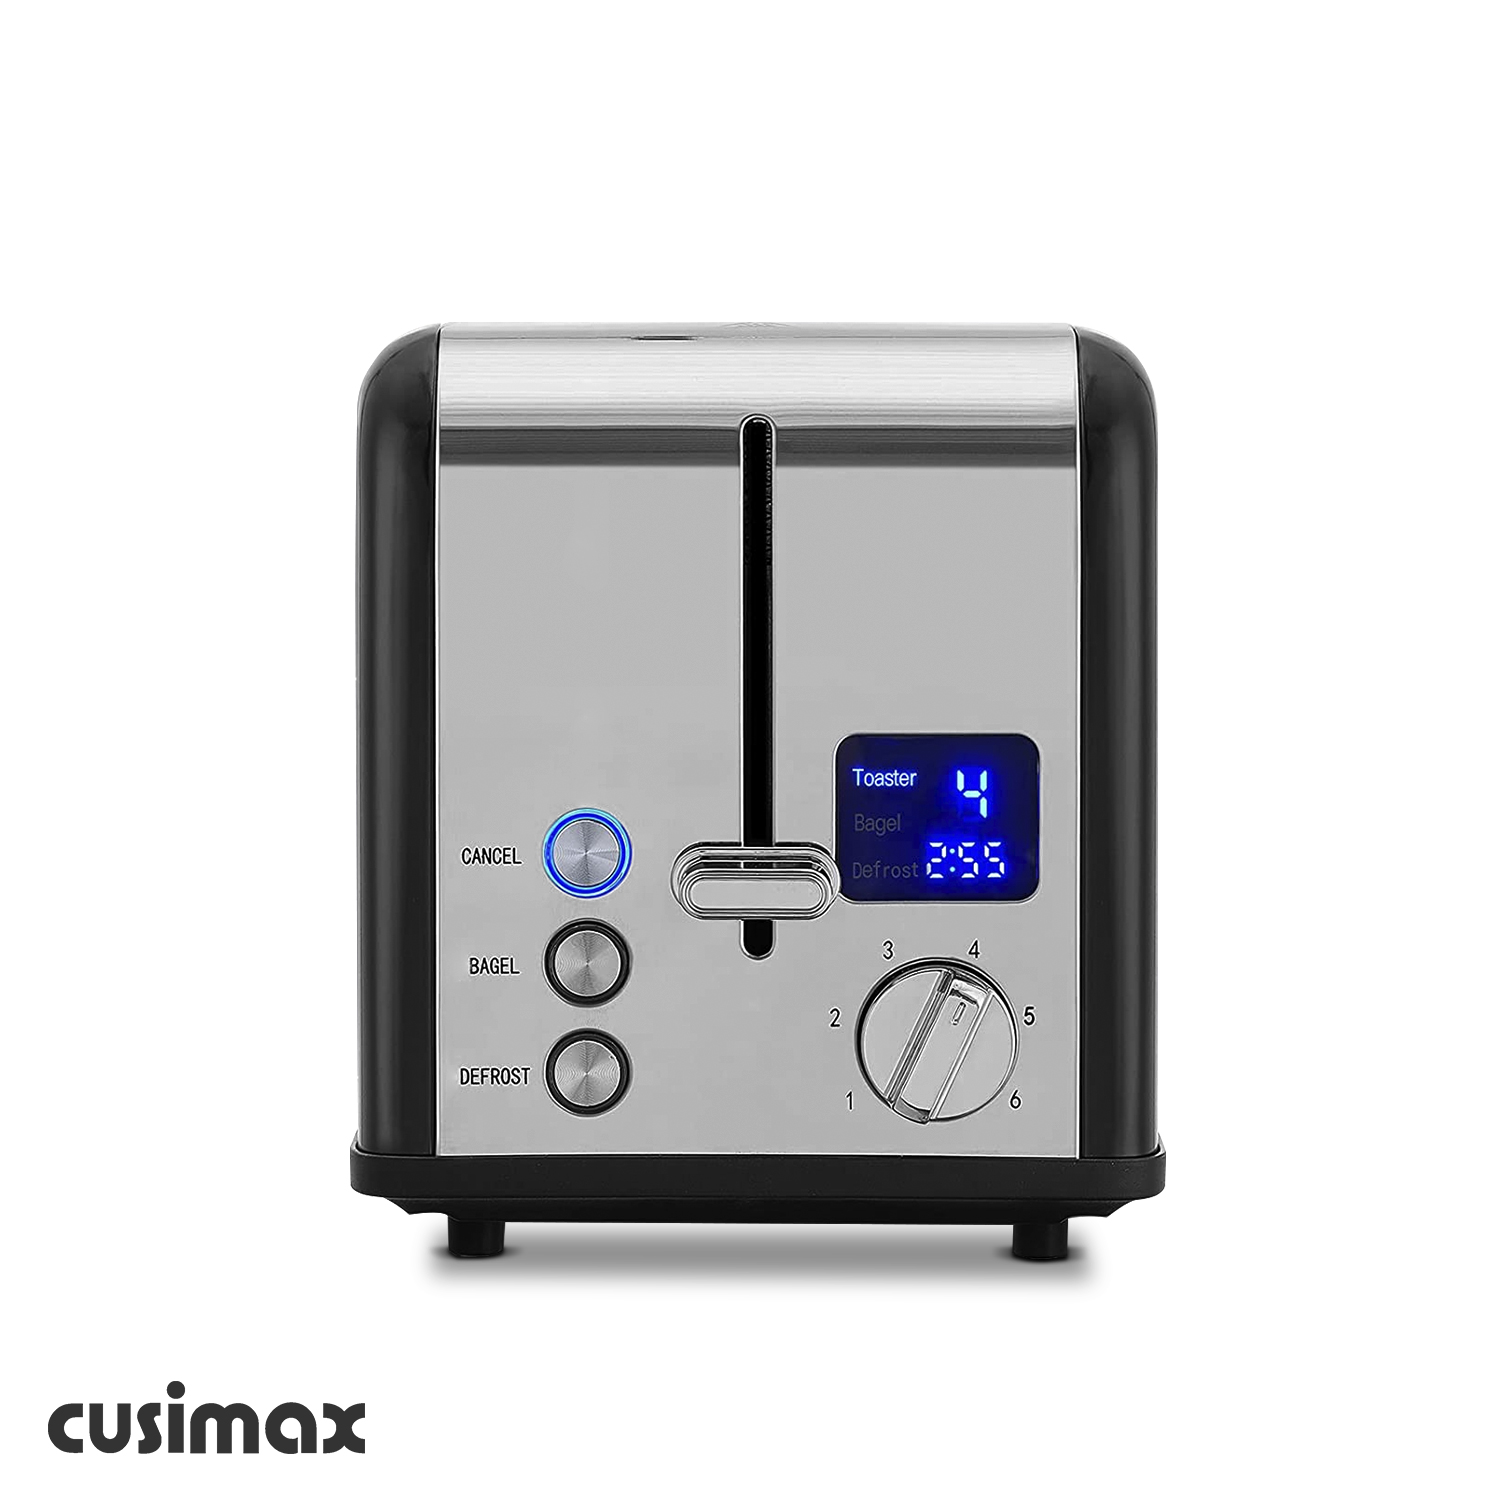 Cusimax 2 Slice Black Stainless Steel Toaster With Large LED Display-Cusimax